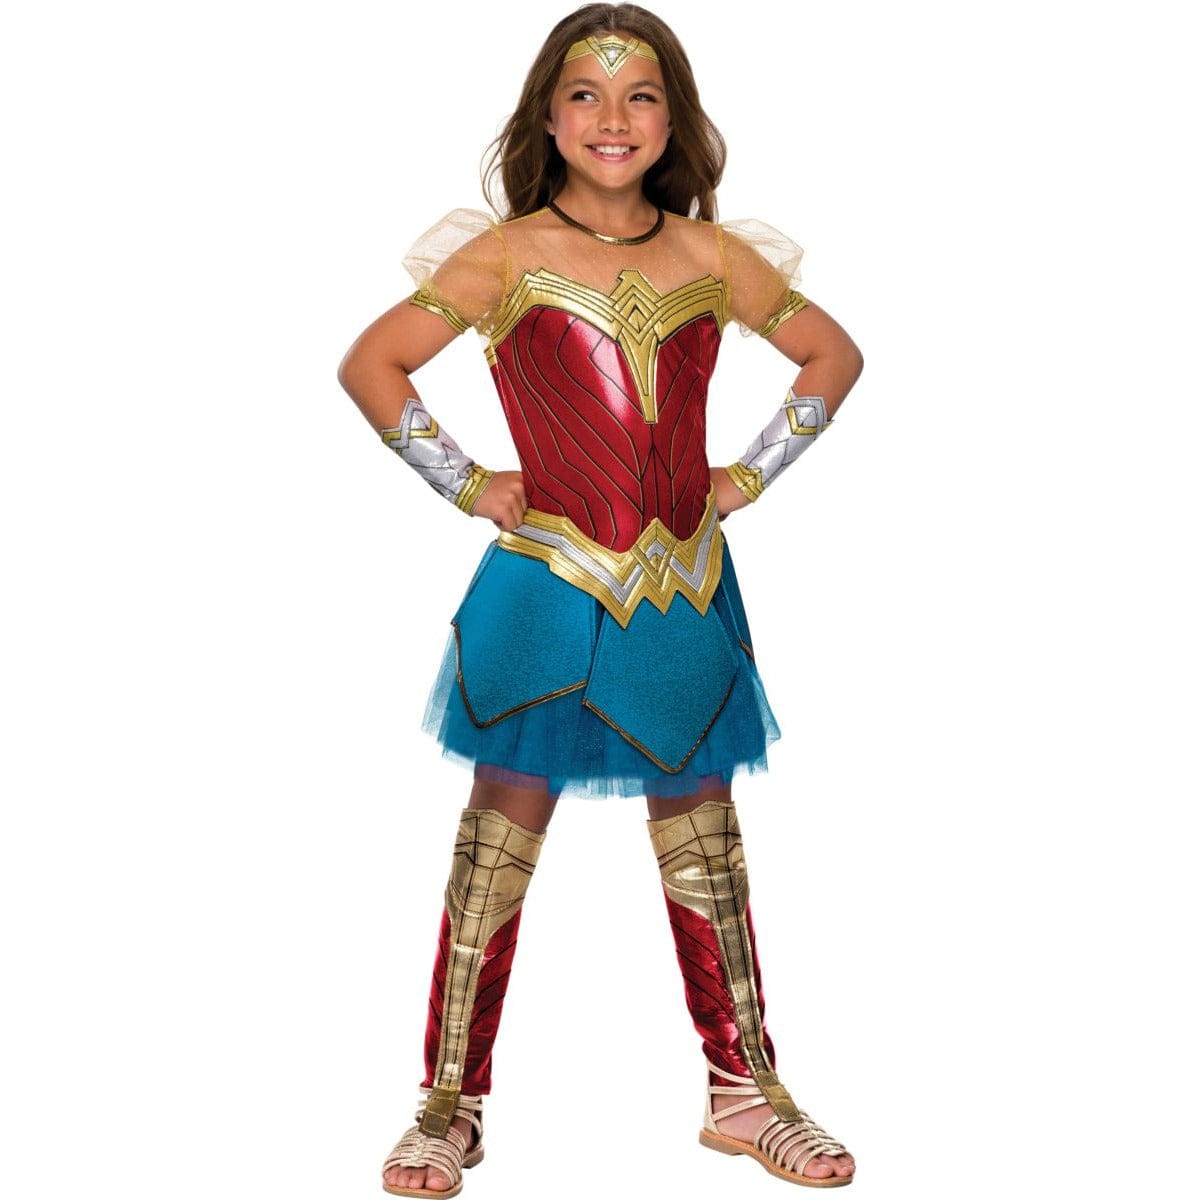  Rubie's Super DC Heroes Wonder Woman Child's Costume, Small :  Toys & Games